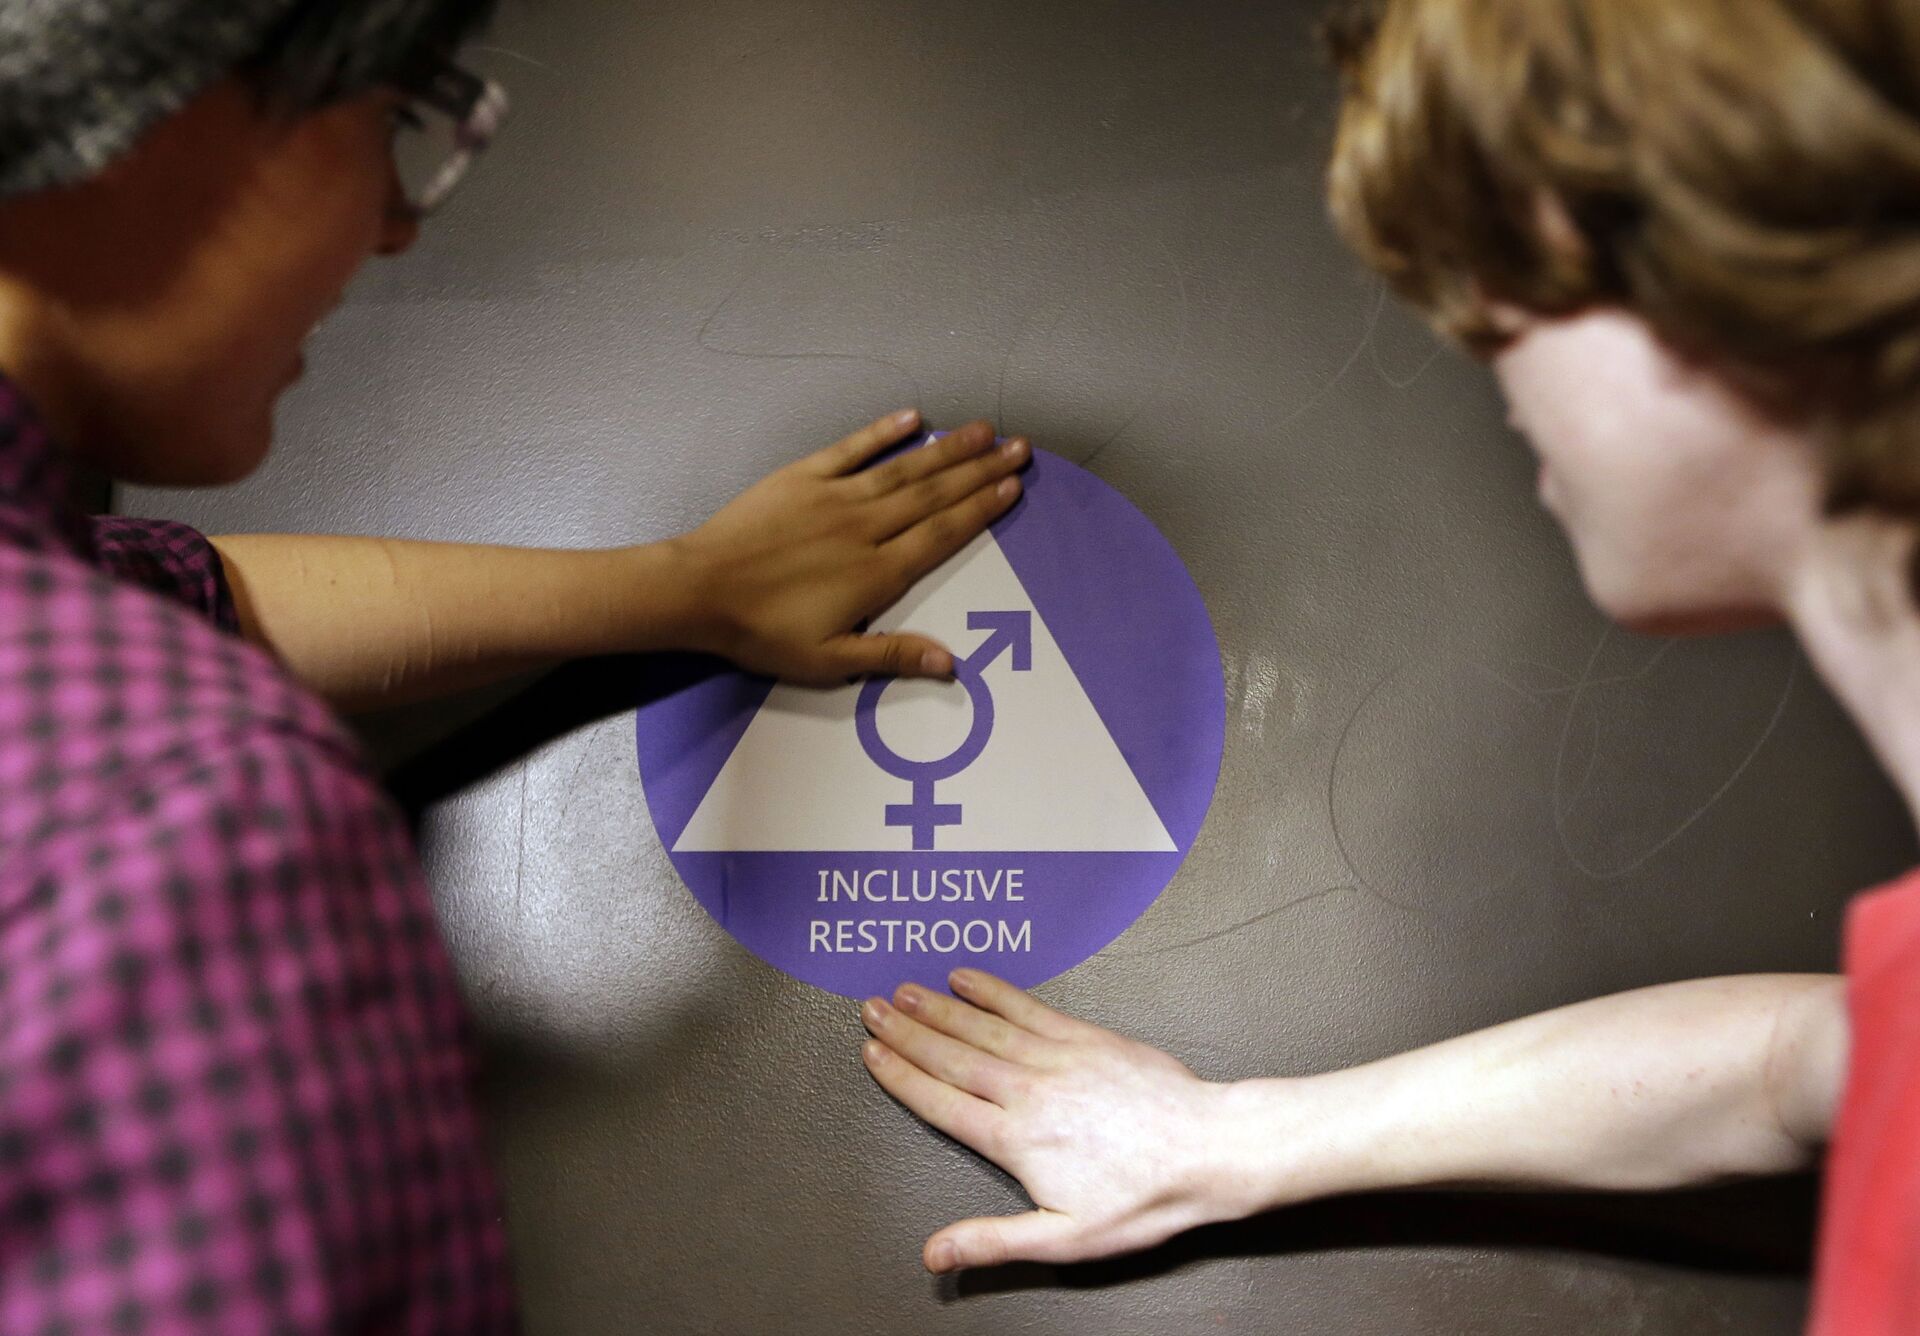 Destin Cramer, left, and Noah Rice place a new sticker on the door at the ceremonial opening of a gender neutral bathroom at Nathan Hale high school Tuesday, May 17, 2016, in Seattle - Sputnik International, 1920, 28.07.2023